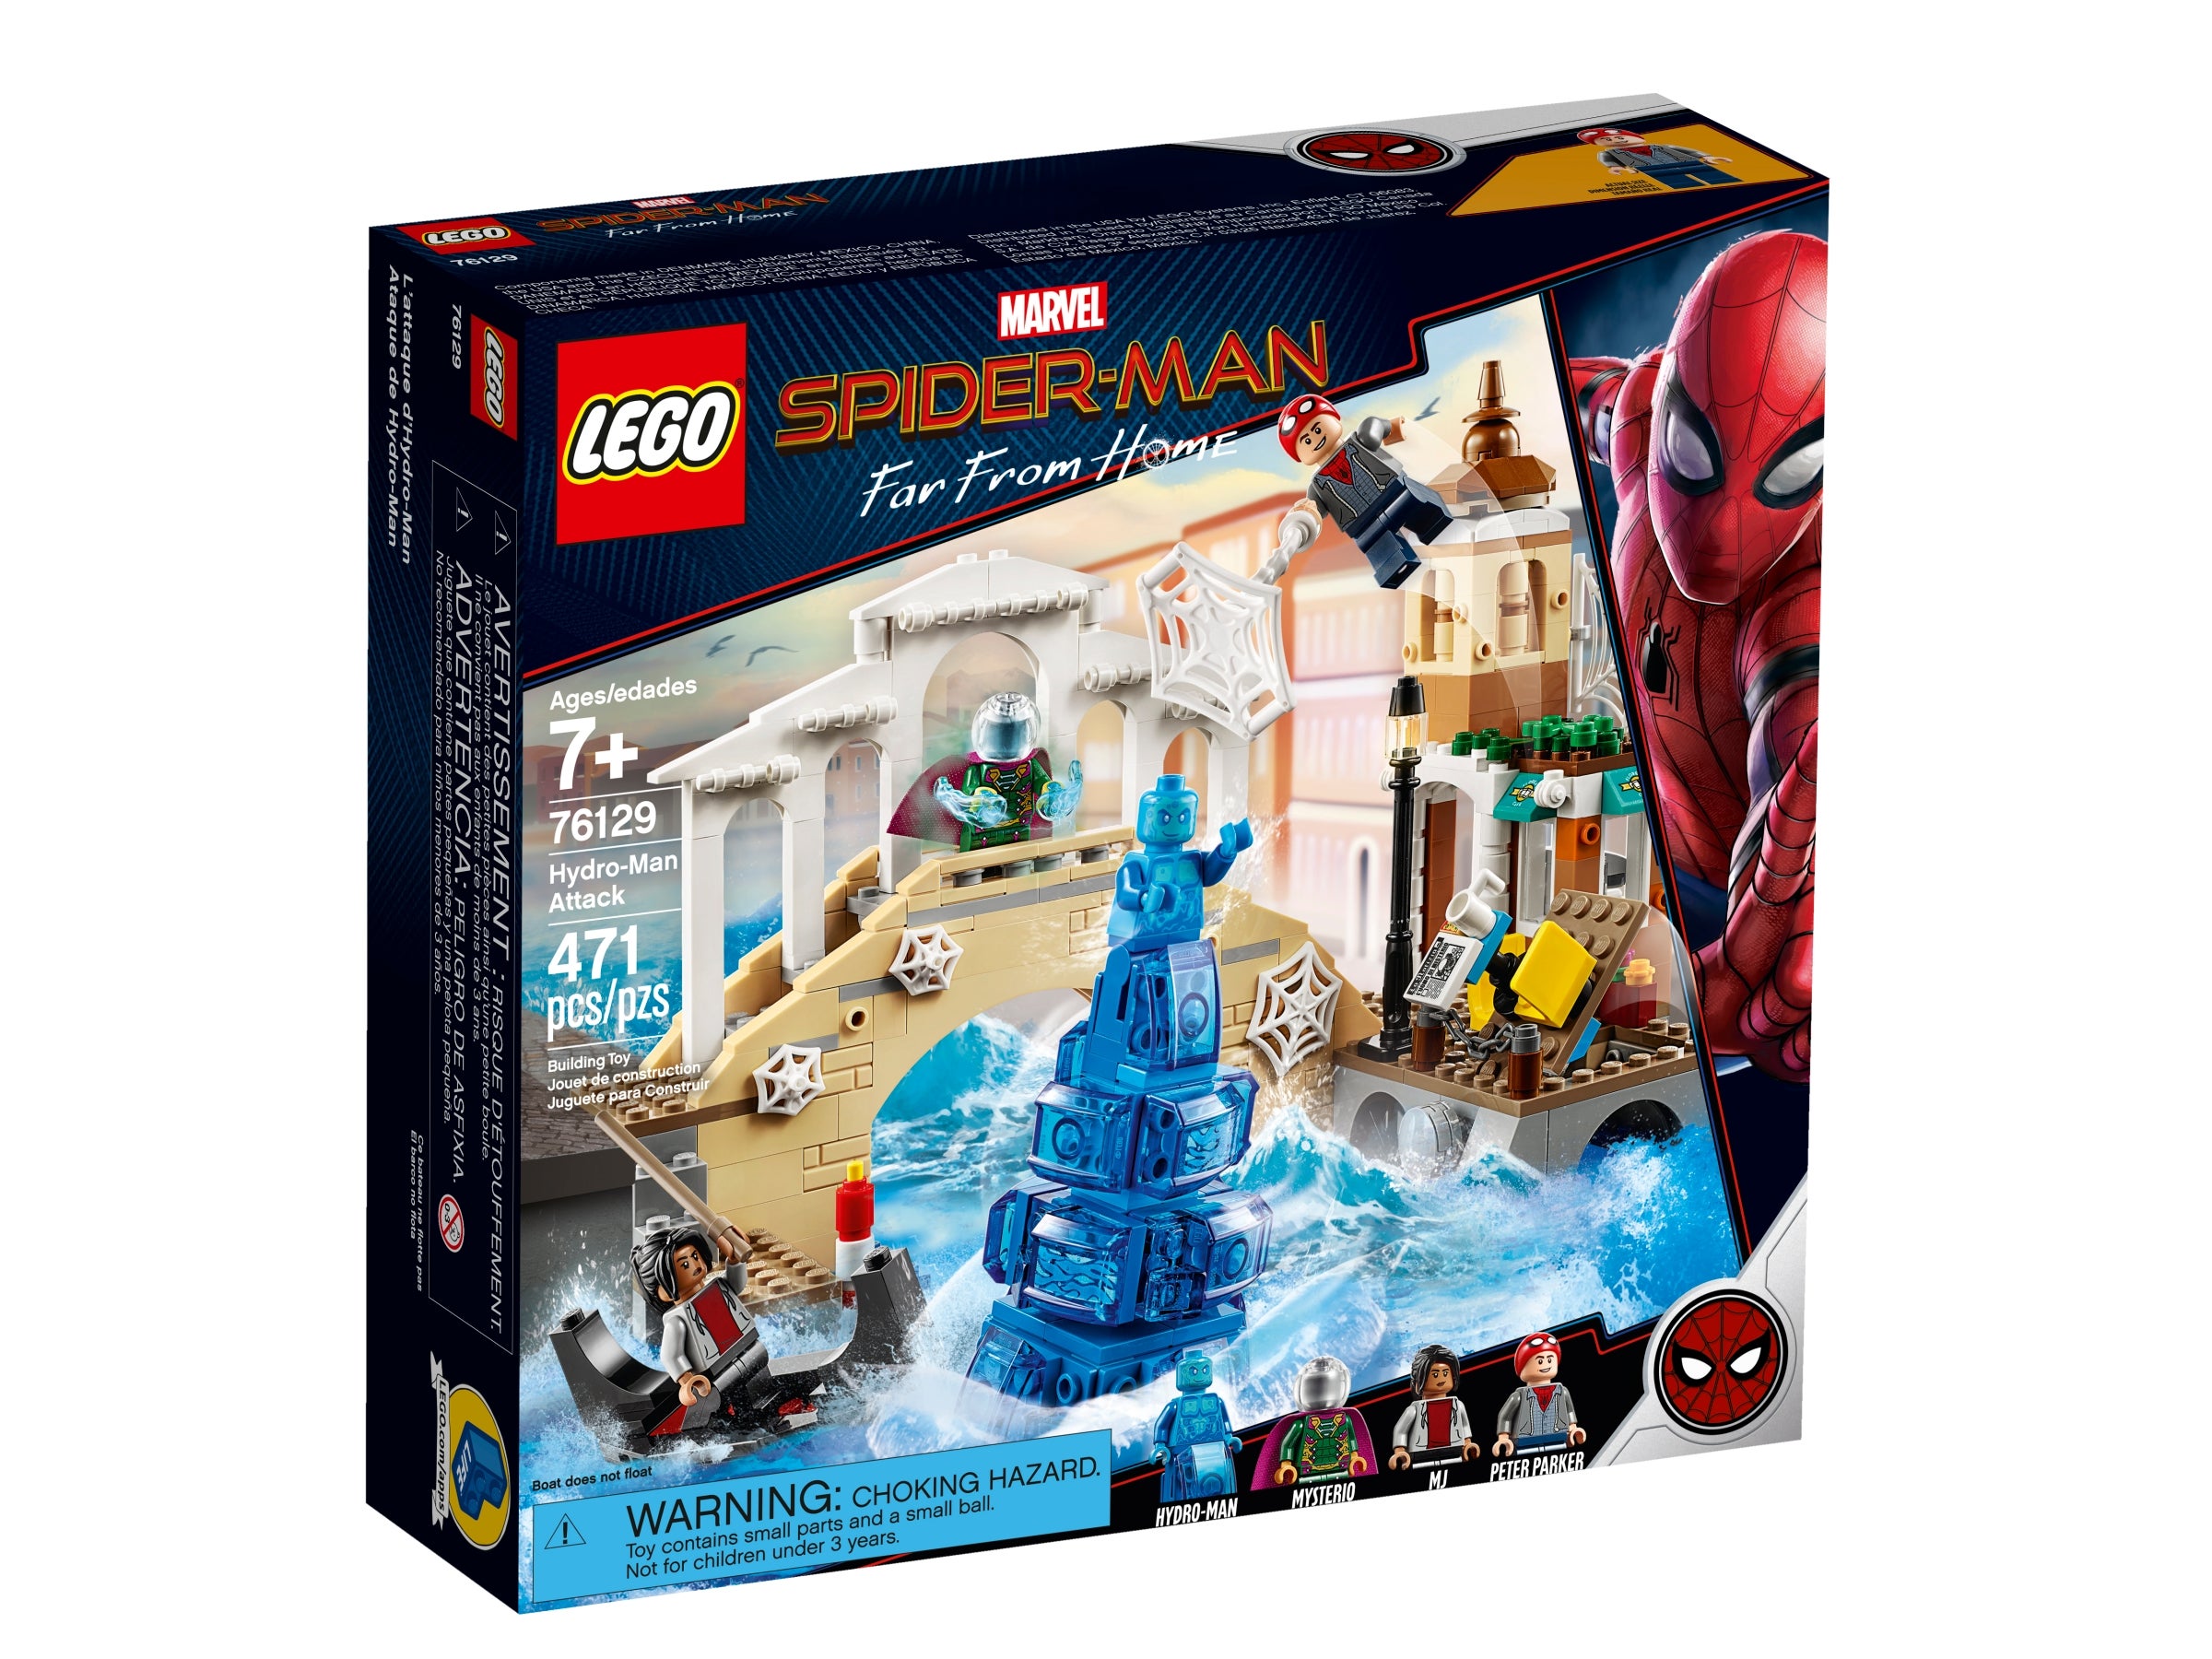 Set LEGO MARVEL SPIDER-MAN FAR FROM HOME réf 76129 HYDRO-MAN ATTACK NEUF scellé 